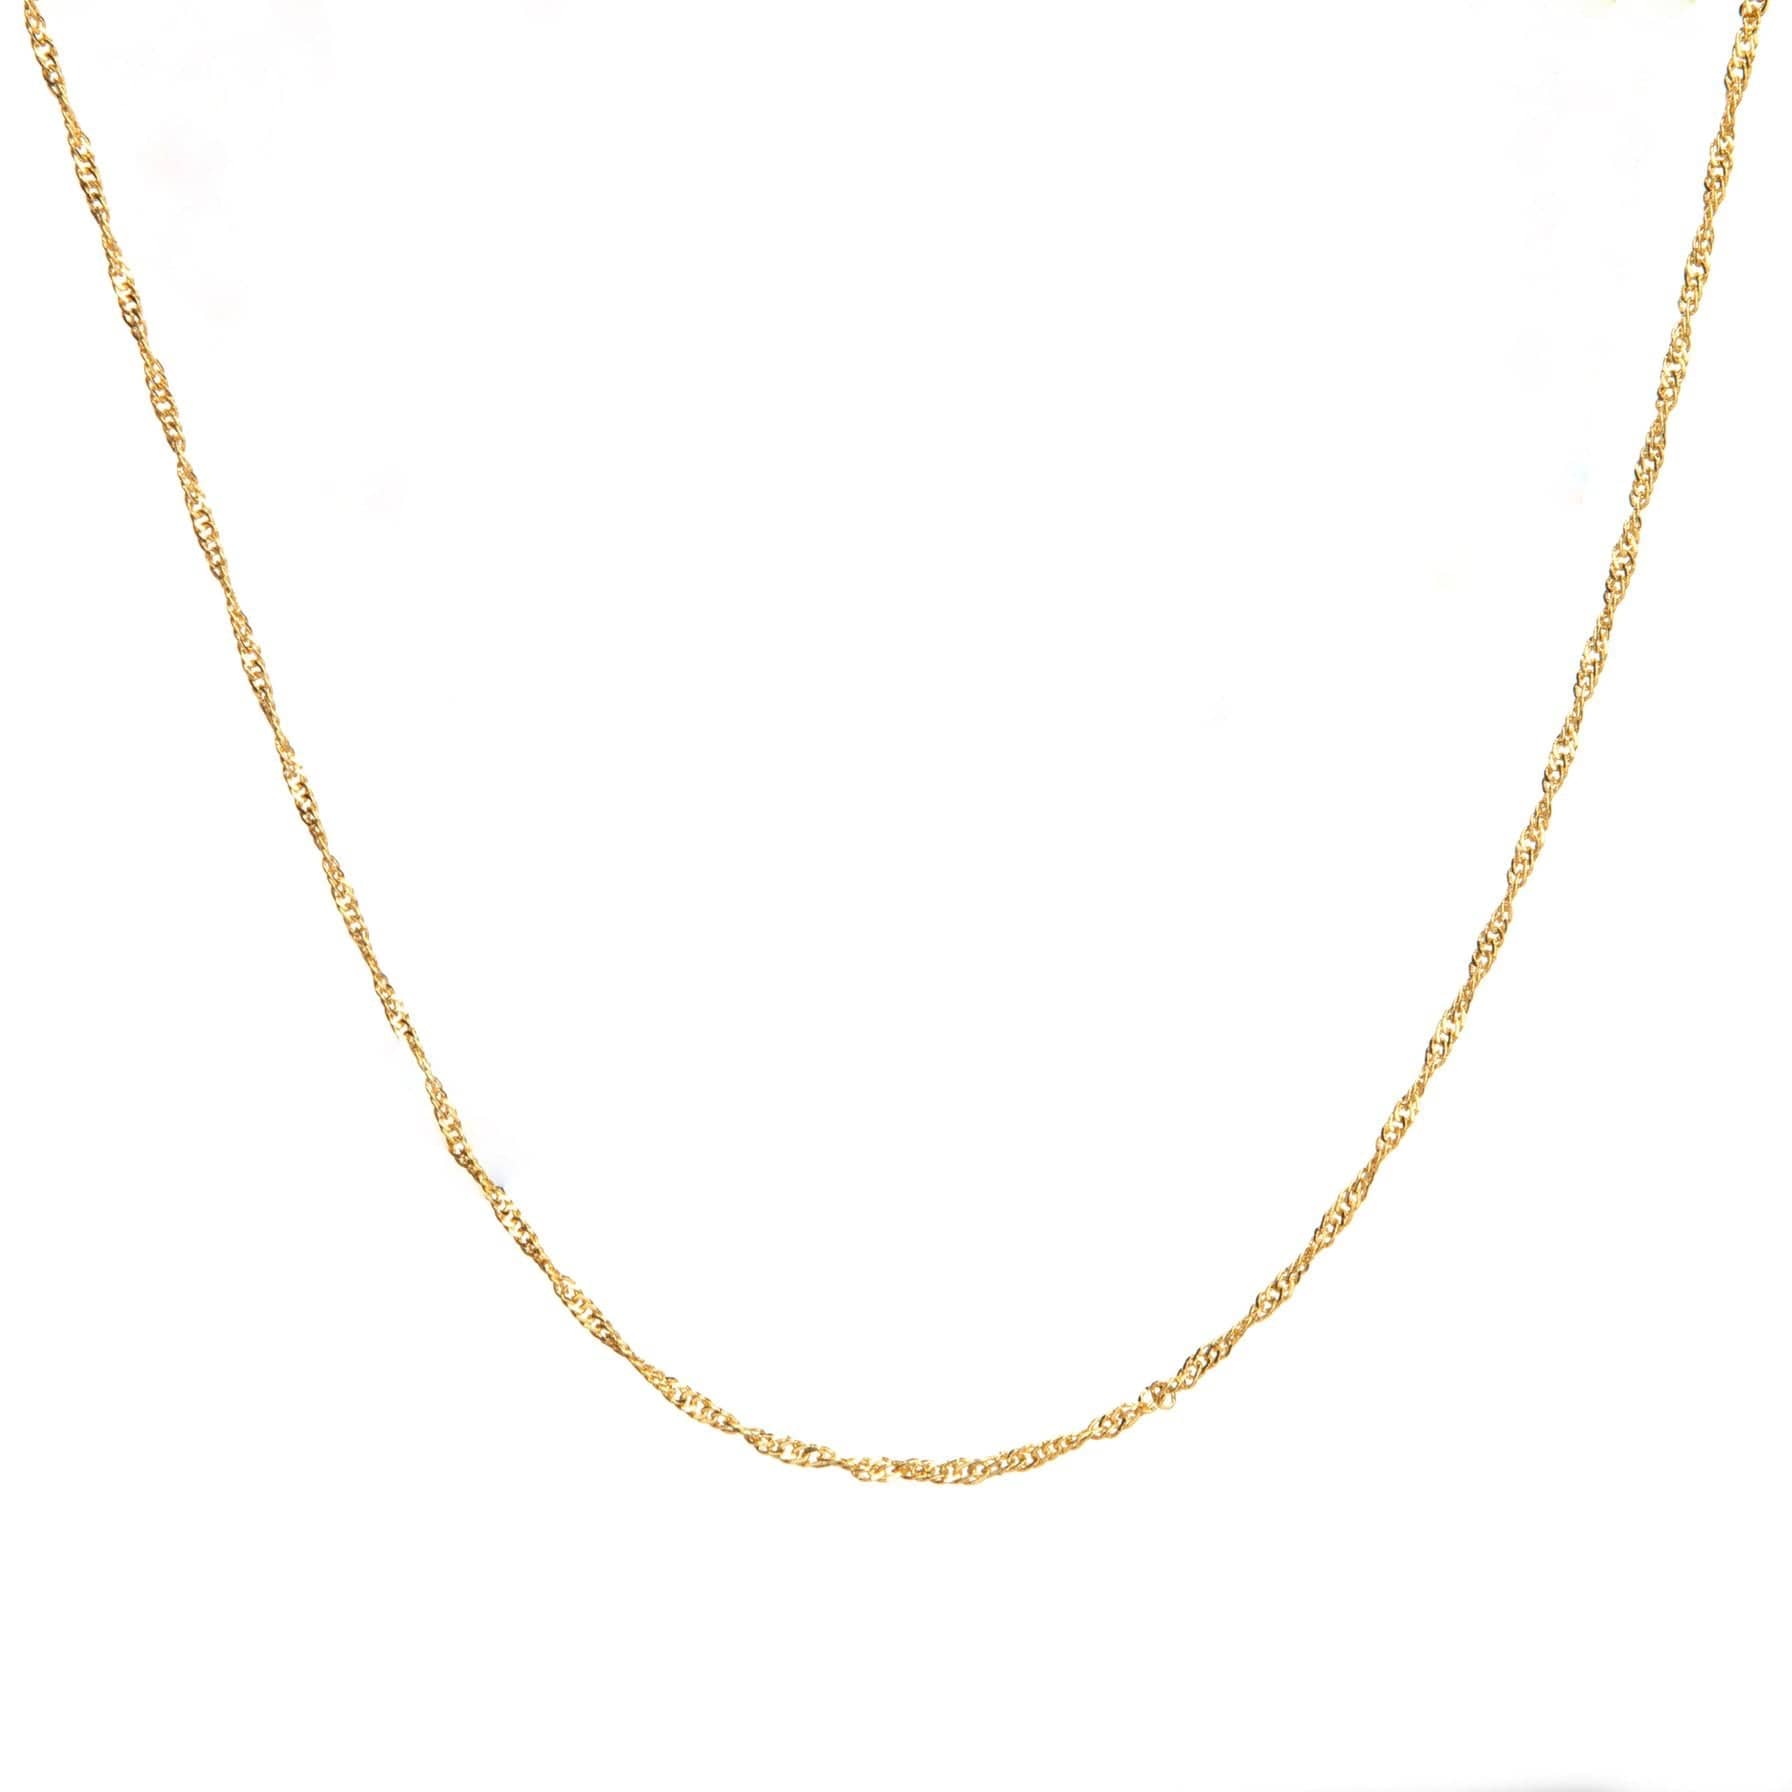 Fine twisted gold necklace